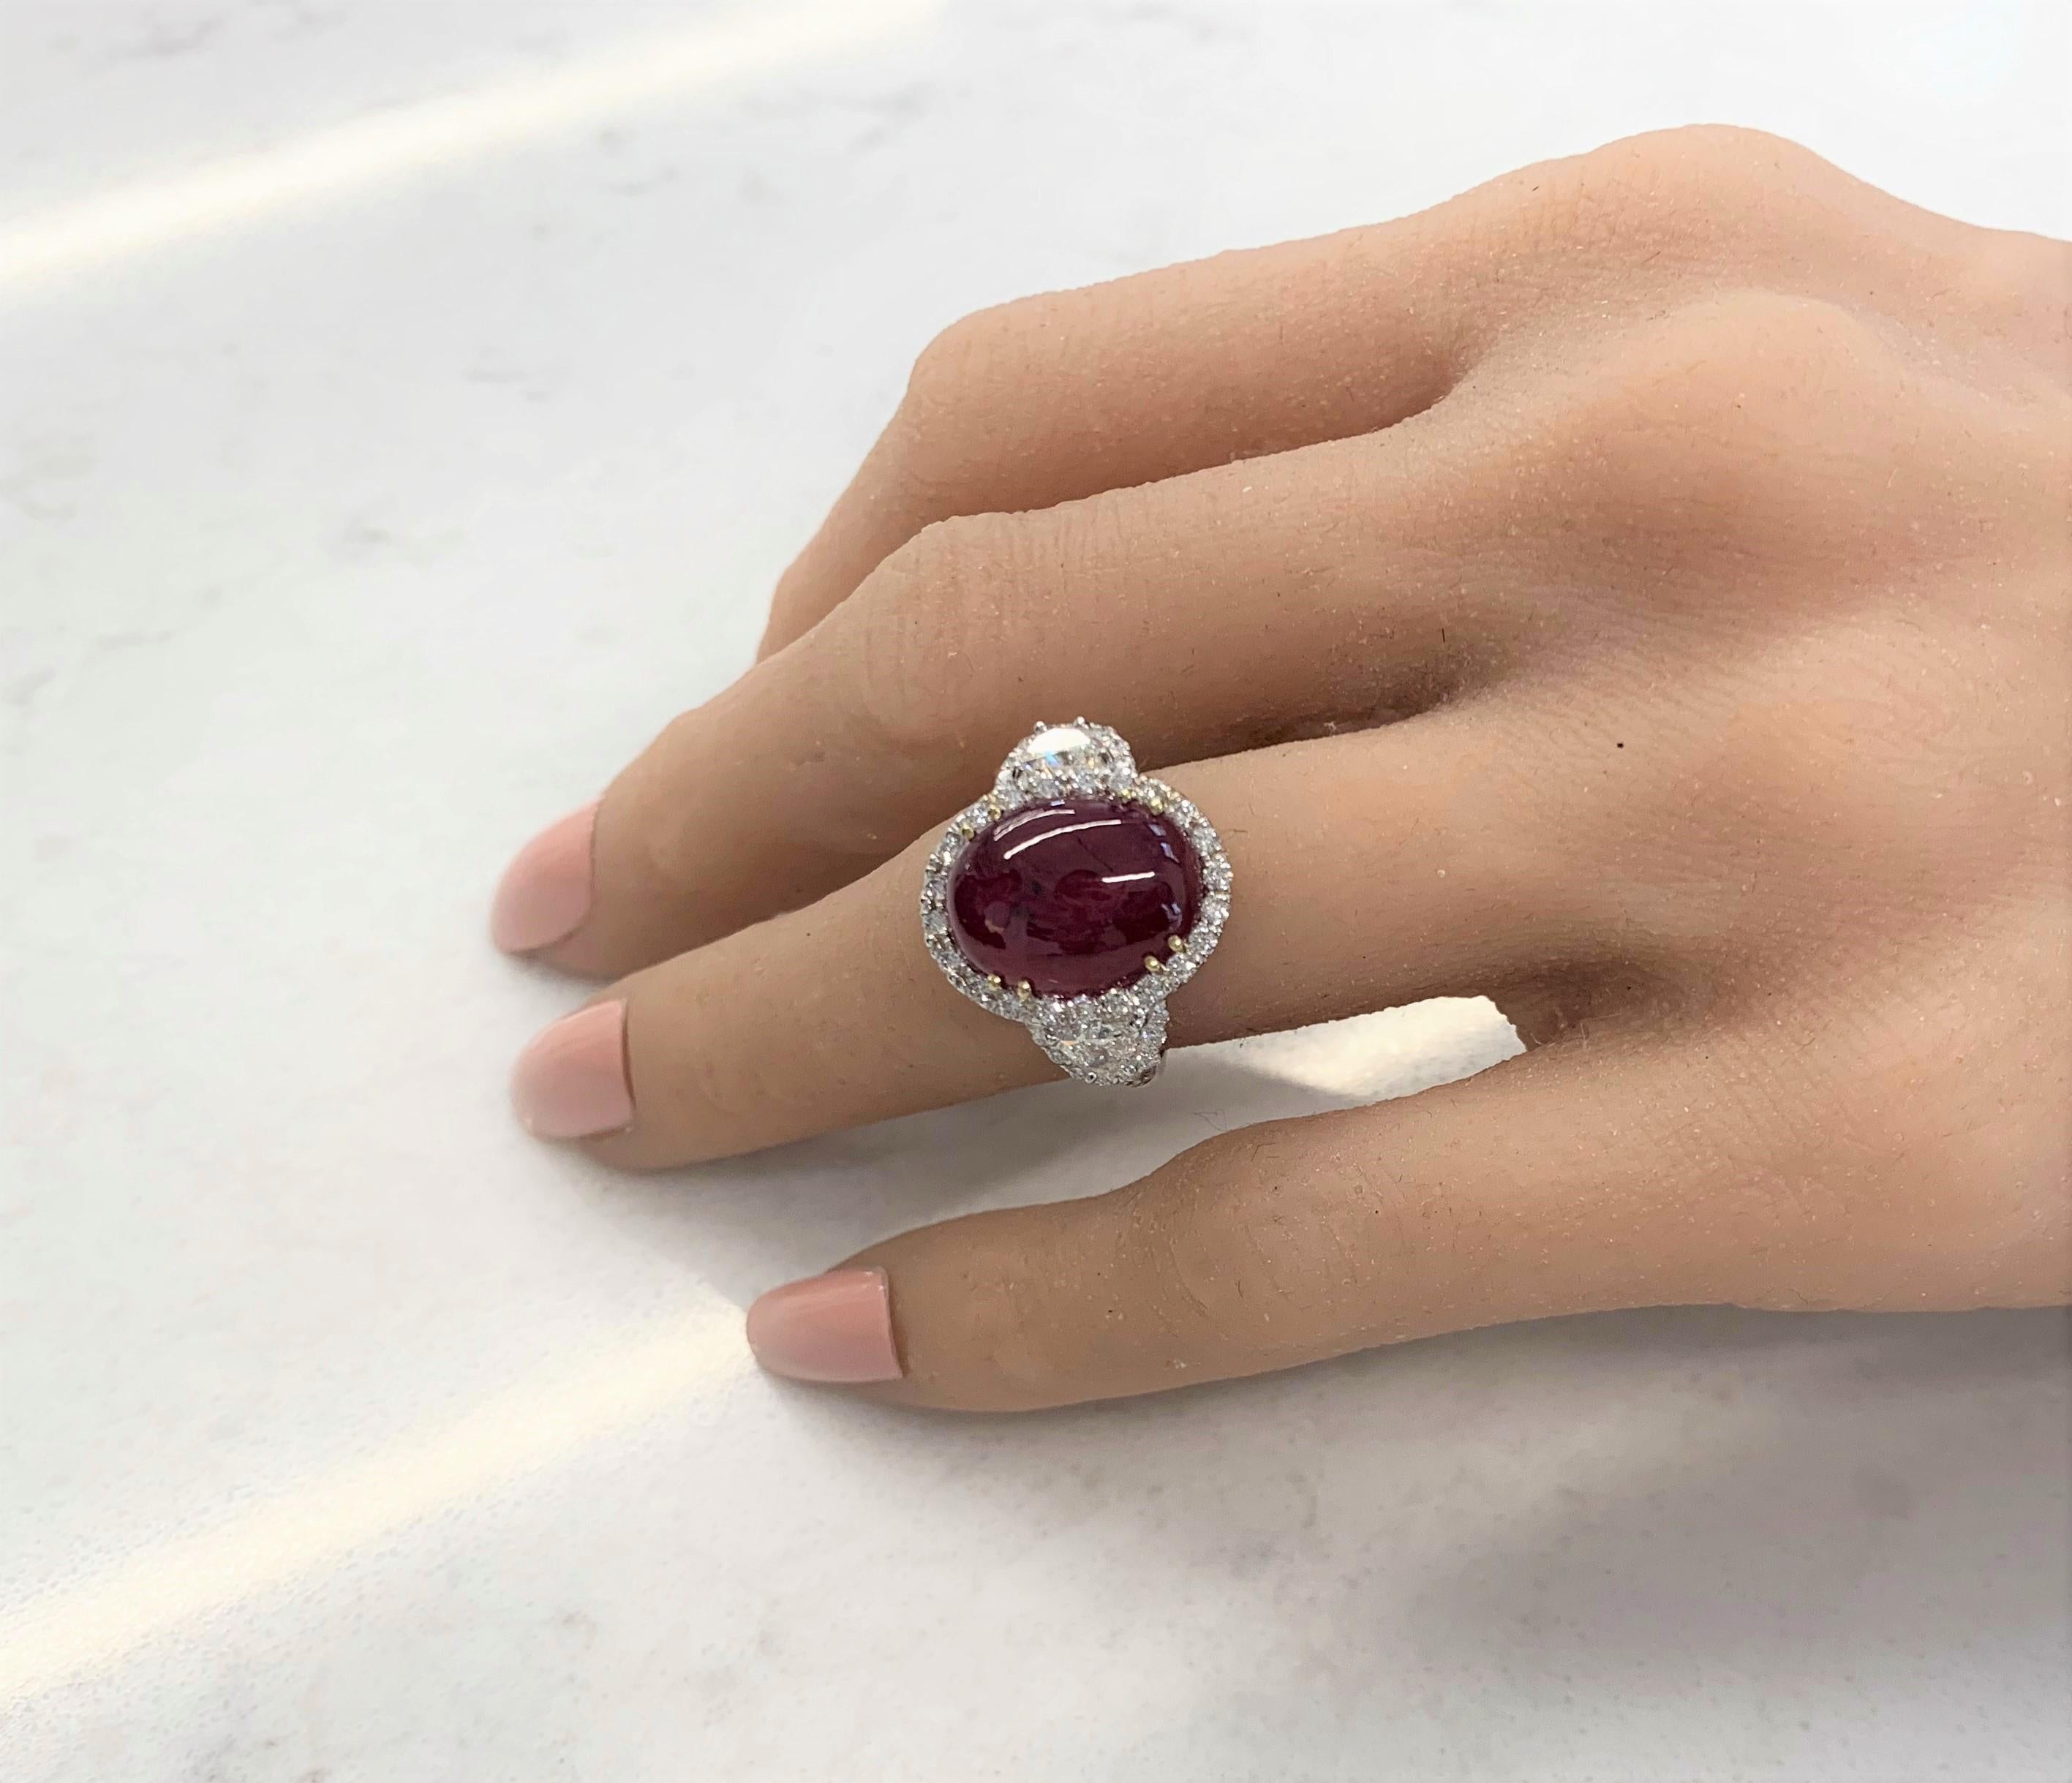 Perfect for those who appreciate the spectacular red color that ruby displays! This stunning brightly polished 18k white gold cocktail ring features a 11.48 carat oval cabochon Burmese ruby that displays an intense red hue, securely prong set in